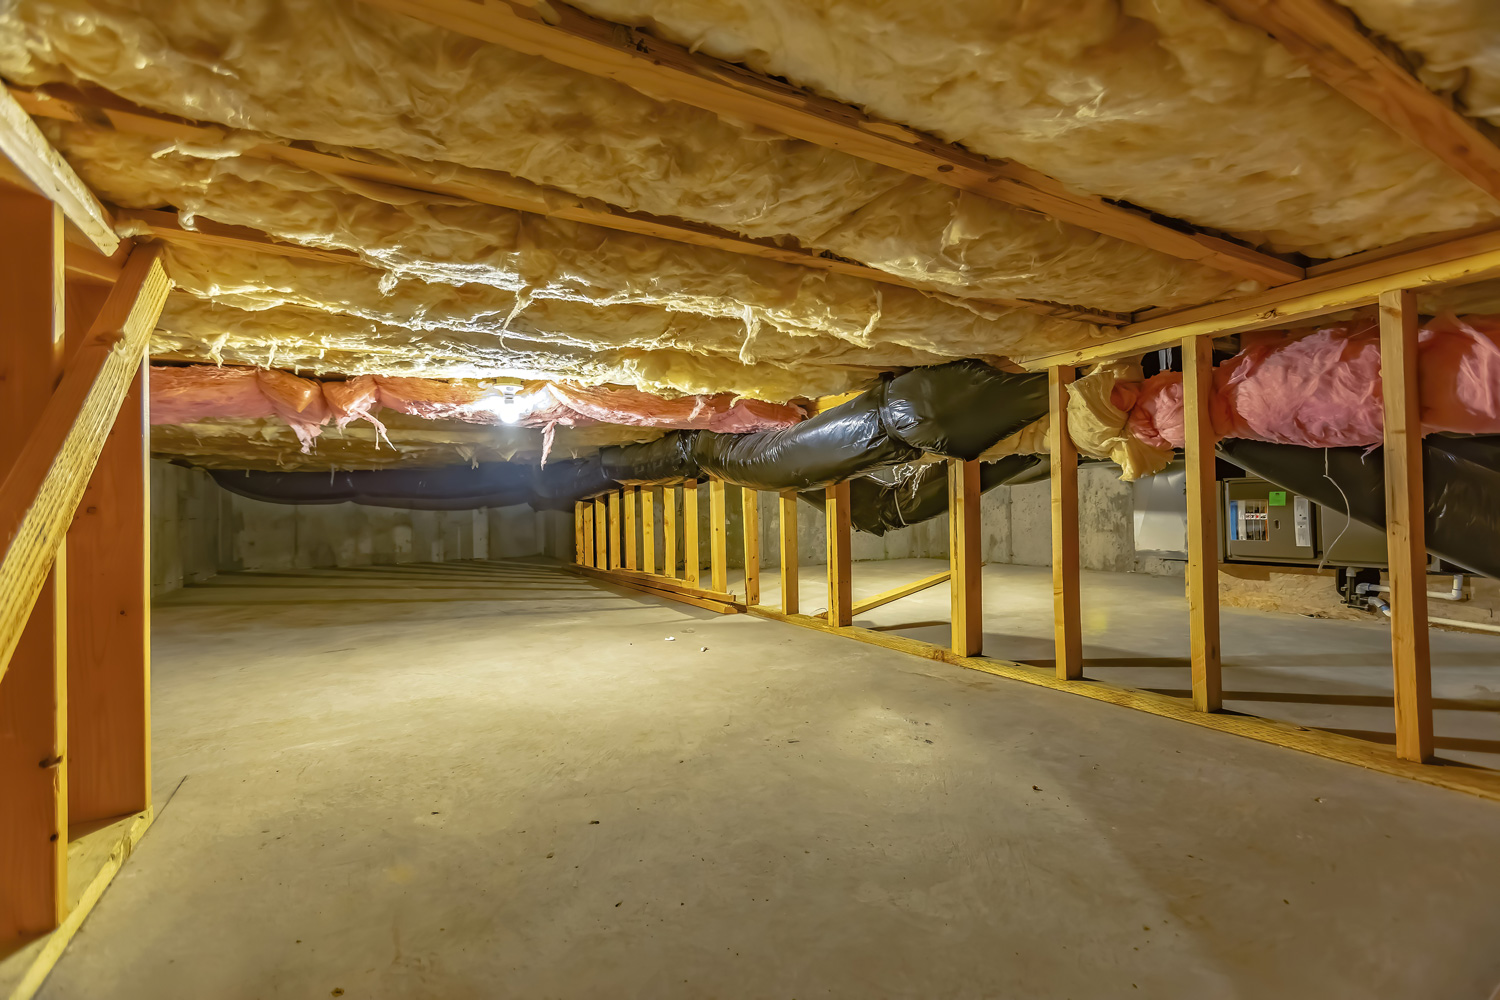 Basement or crawl space with upper floor insulation and wooden support beams.